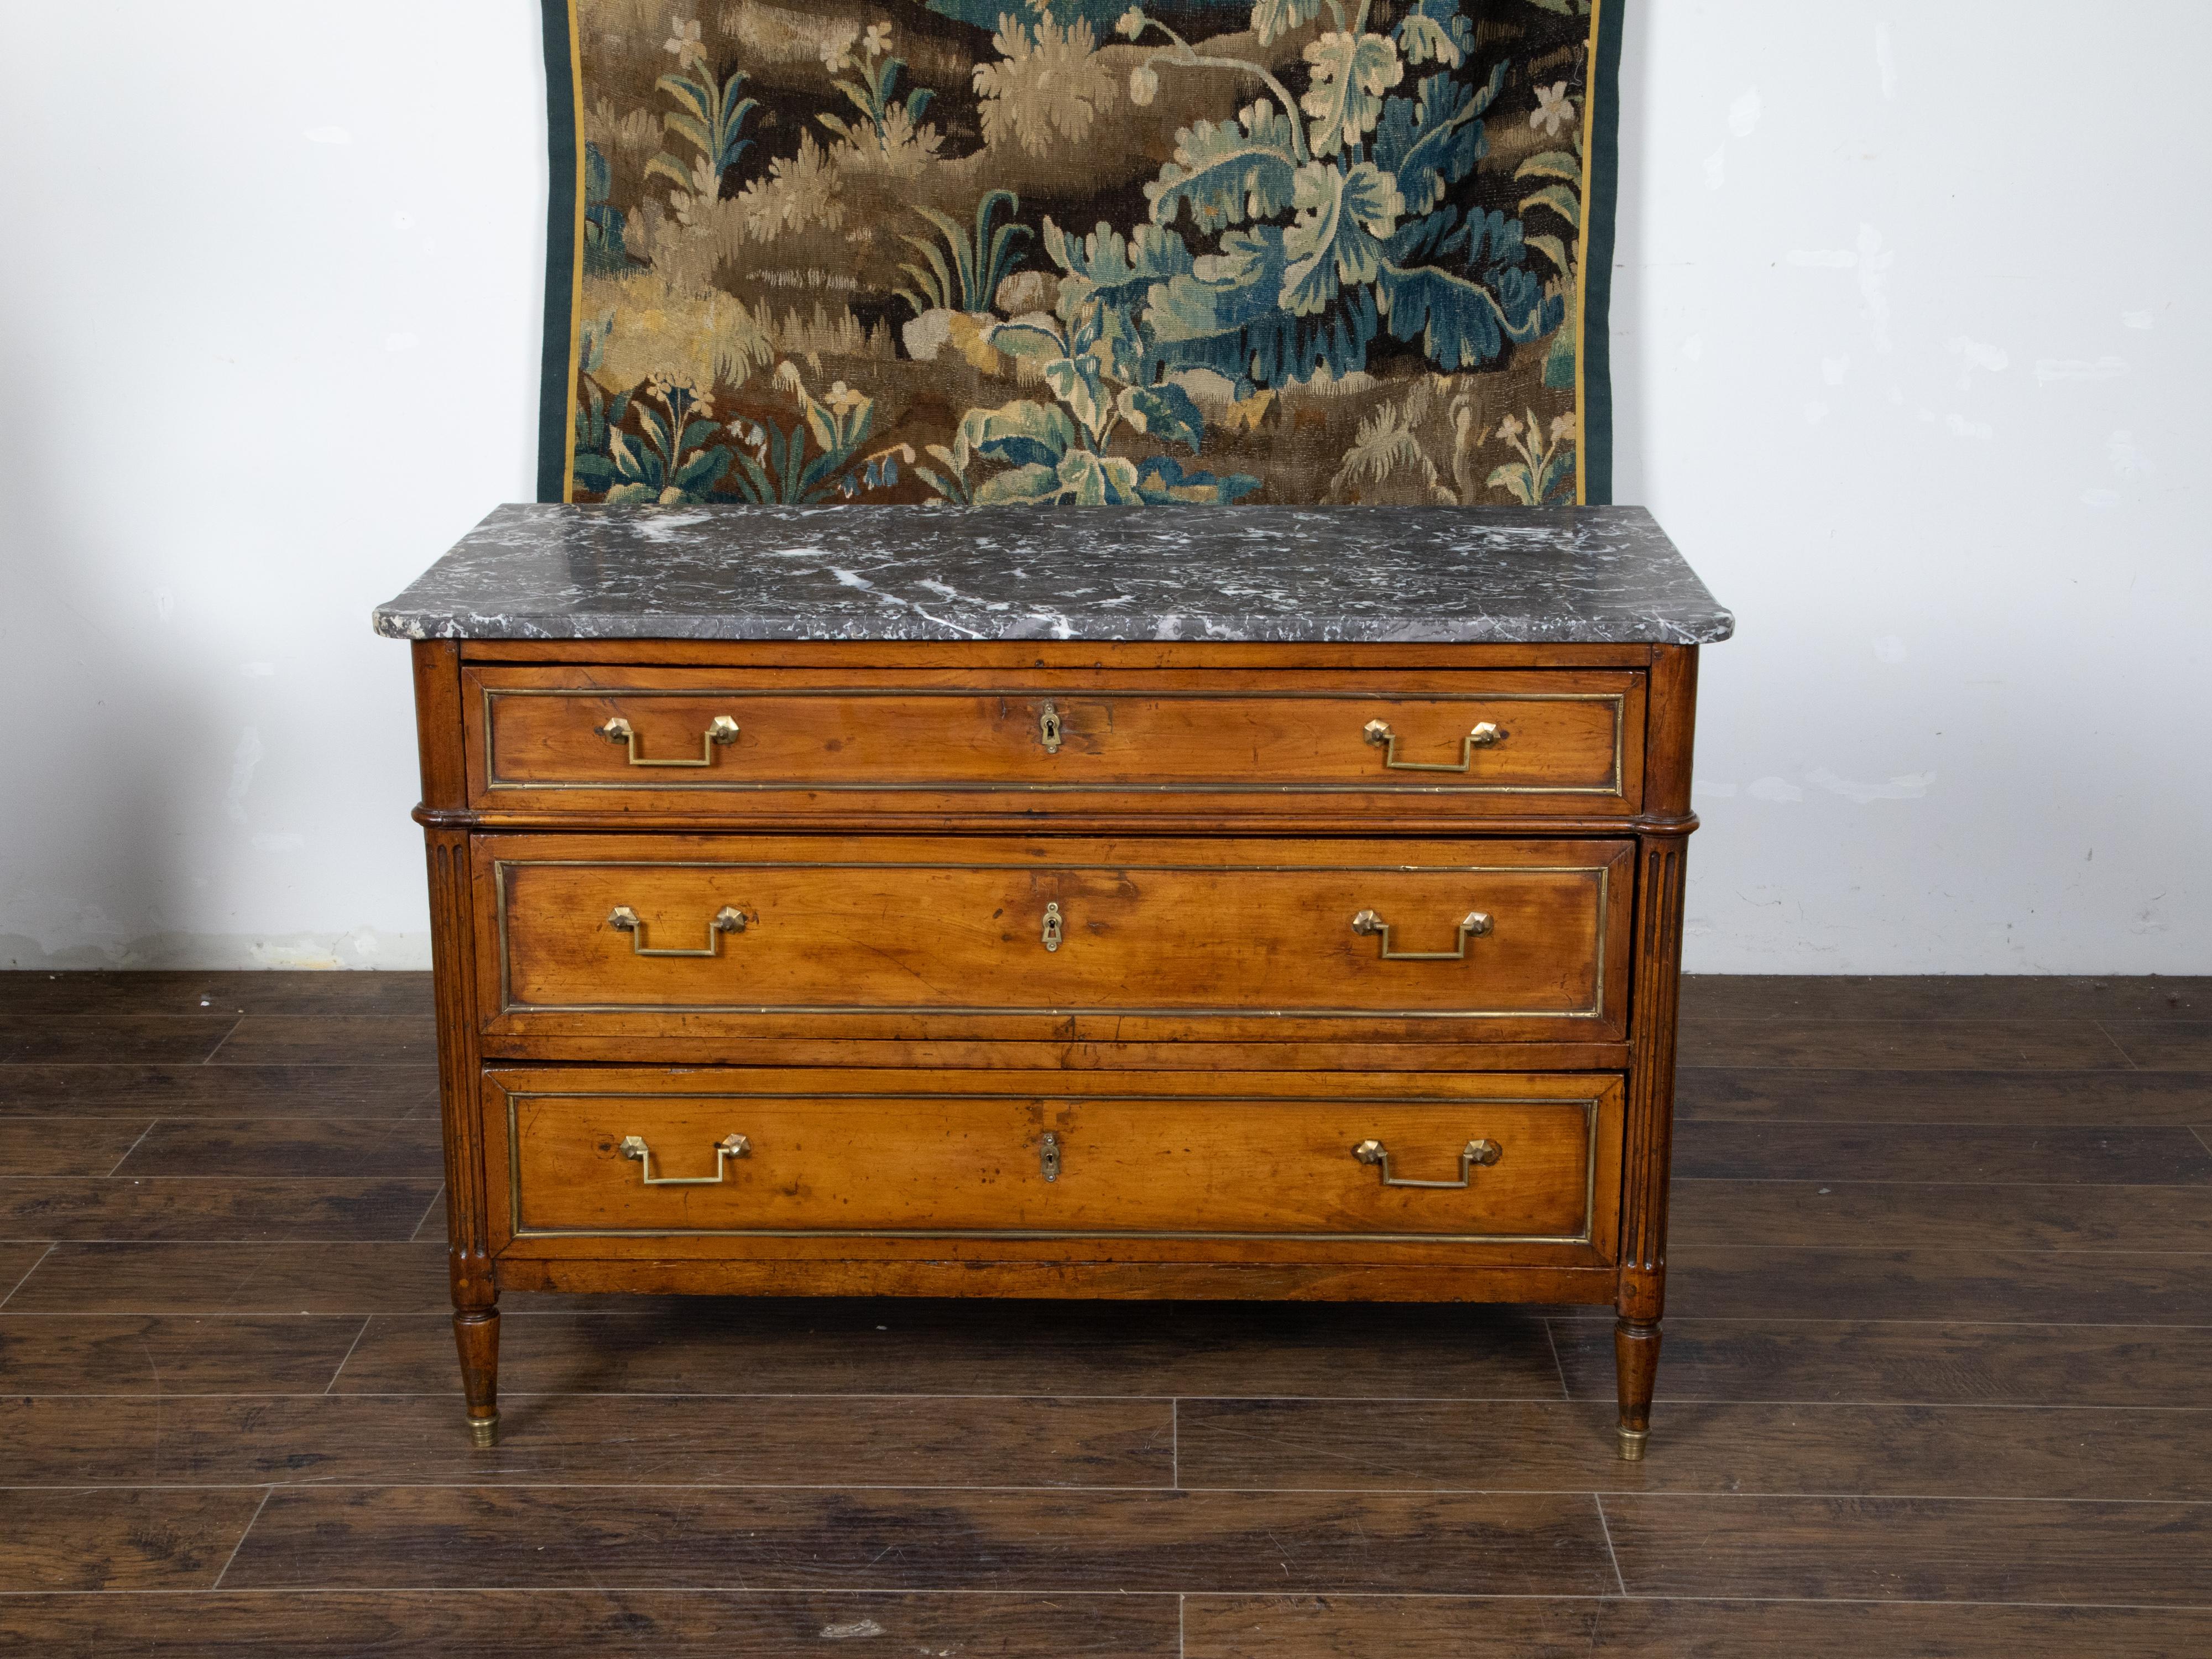 A French Directoire style walnut commode from the 19th century, with three drawers, grey marble top, brass accents and fluted posts. Created in France during the 19th century, this walnut commode showcases the stylistic characteristics of the